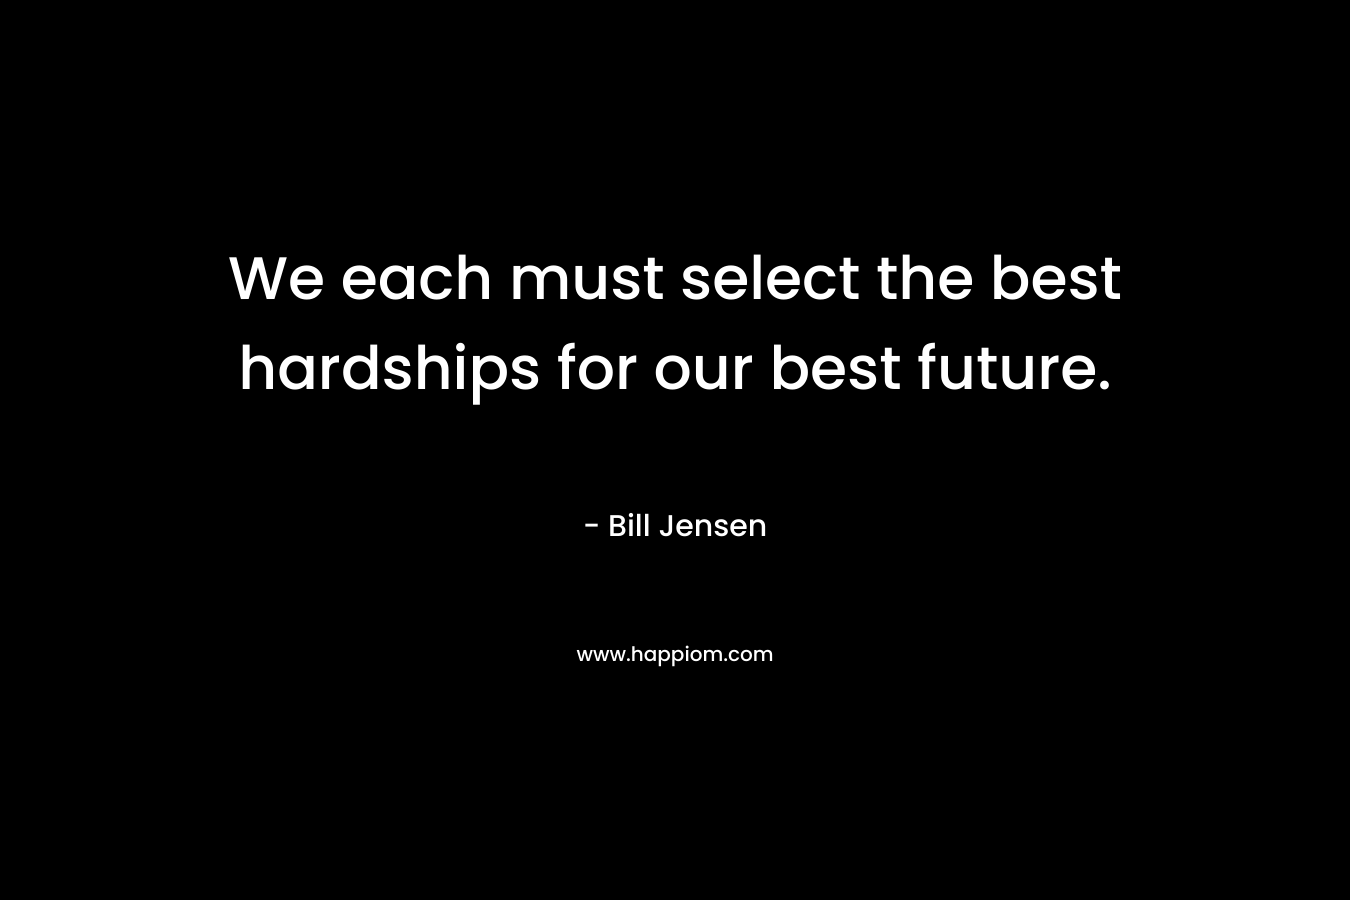 We each must select the best hardships for our best future. – Bill Jensen